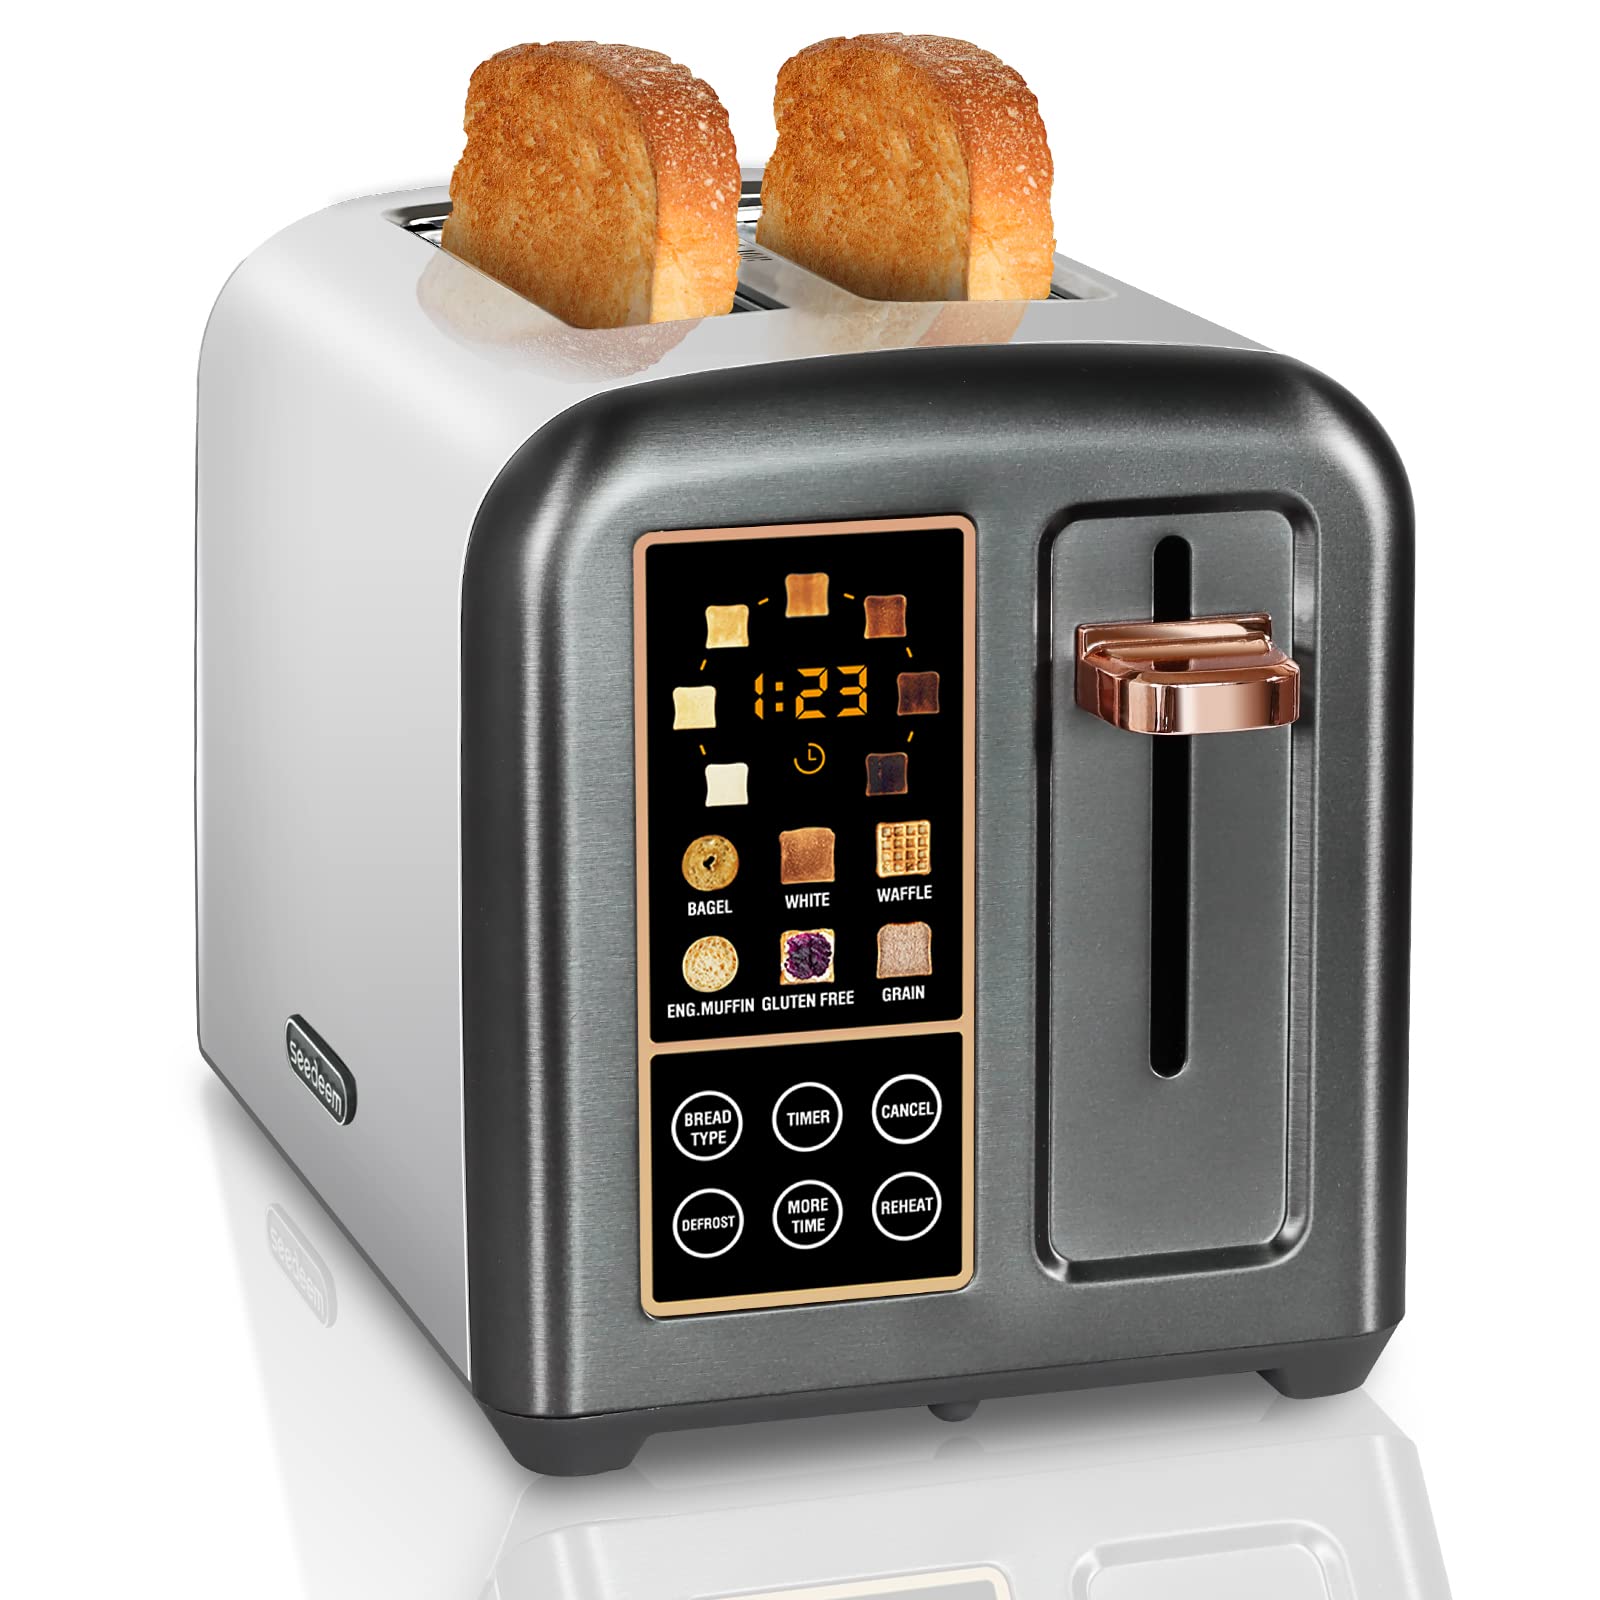 SEEDEEM Toaster 2 Slice, Stainless Steel Bread Toaster with LCD Display and Touch Buttons, 50% Faster Heating Speed, 6 Bread Selection, 7 Shade Settings, 1.5''Wide Slots Toaster with Cancel/Defrost/Reheat Functions, Removable Crumb Tray, 1350W, Dark Metal